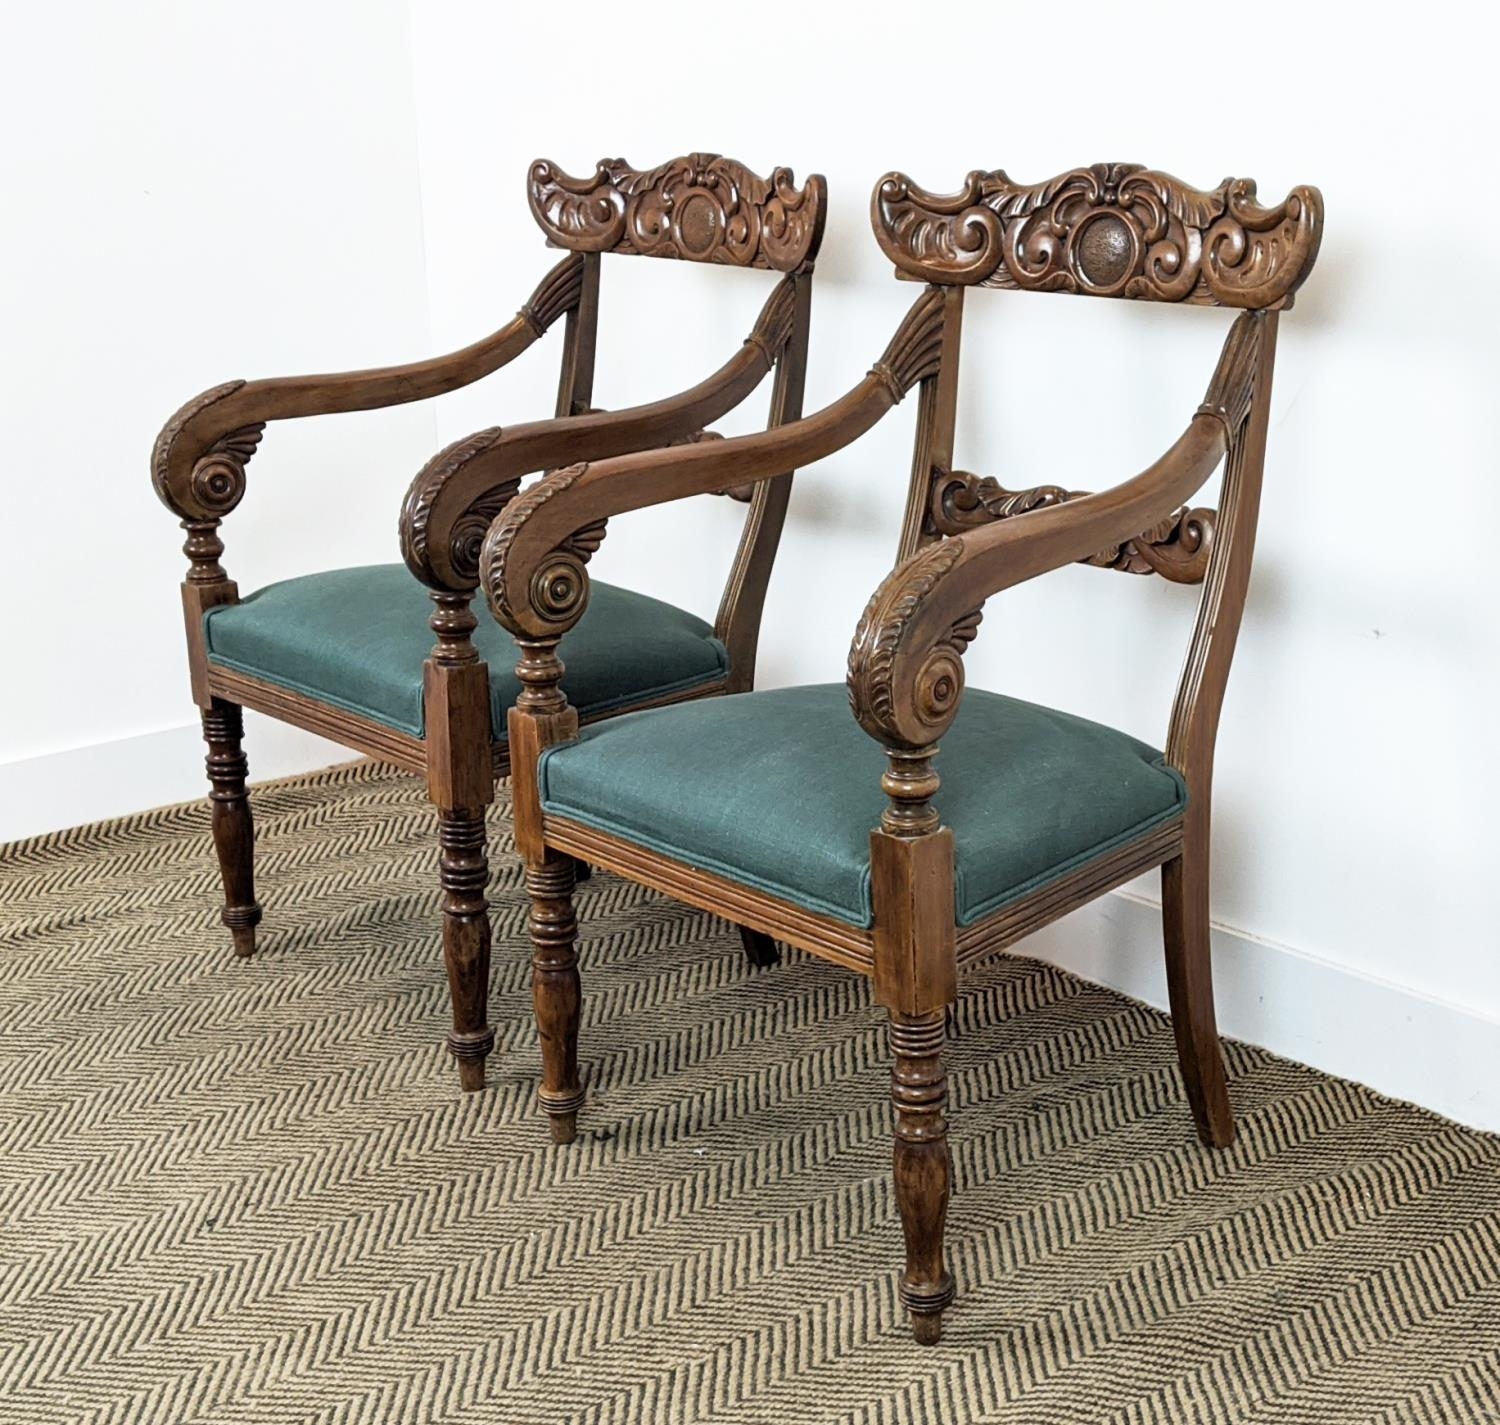 ARMCHAIRS, a pair, mid 19th century mahogany with green stuffover seats, 91cm H x 58cm x 58cm. (2) - Image 8 of 18